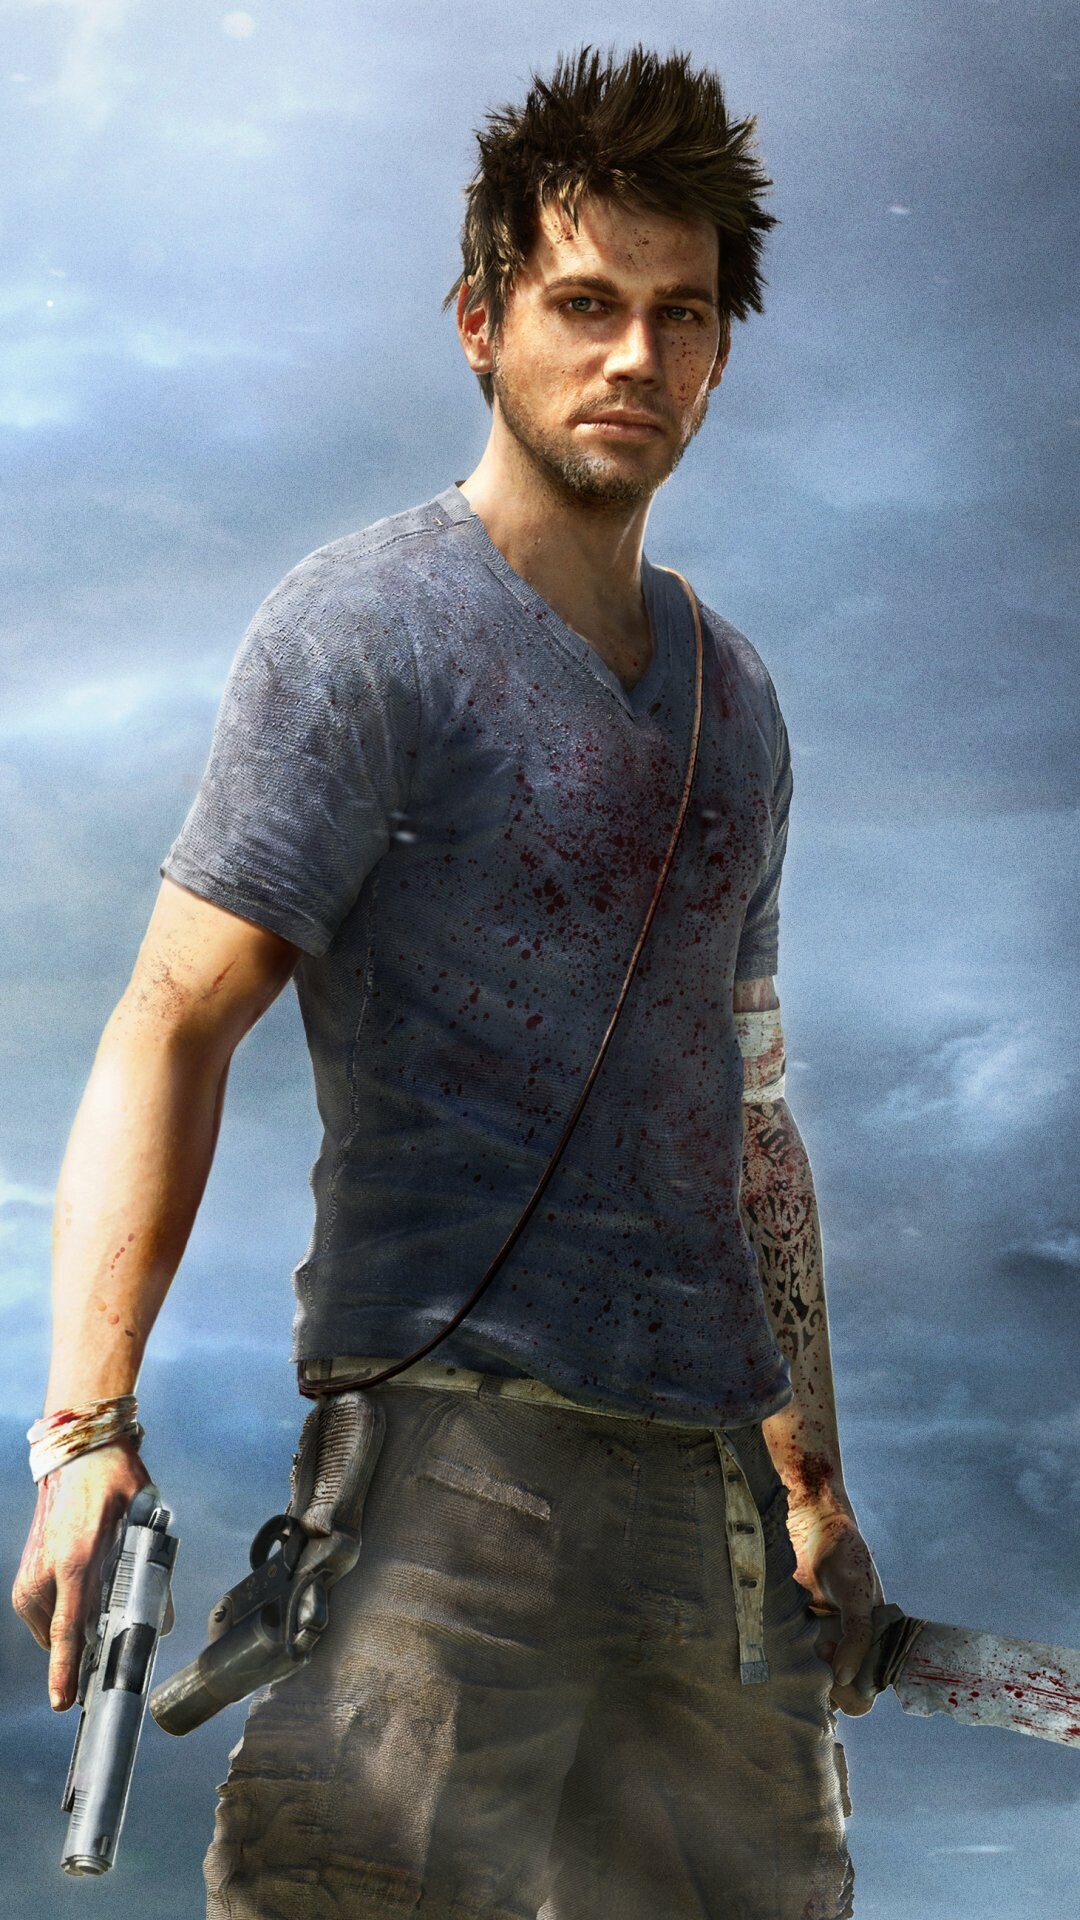 Far Cry 3: The protagonist, Jason Brody, a daredevil who is on a holiday in the Pacific with his two brothers and some friends. 1080x1920 Full HD Background.